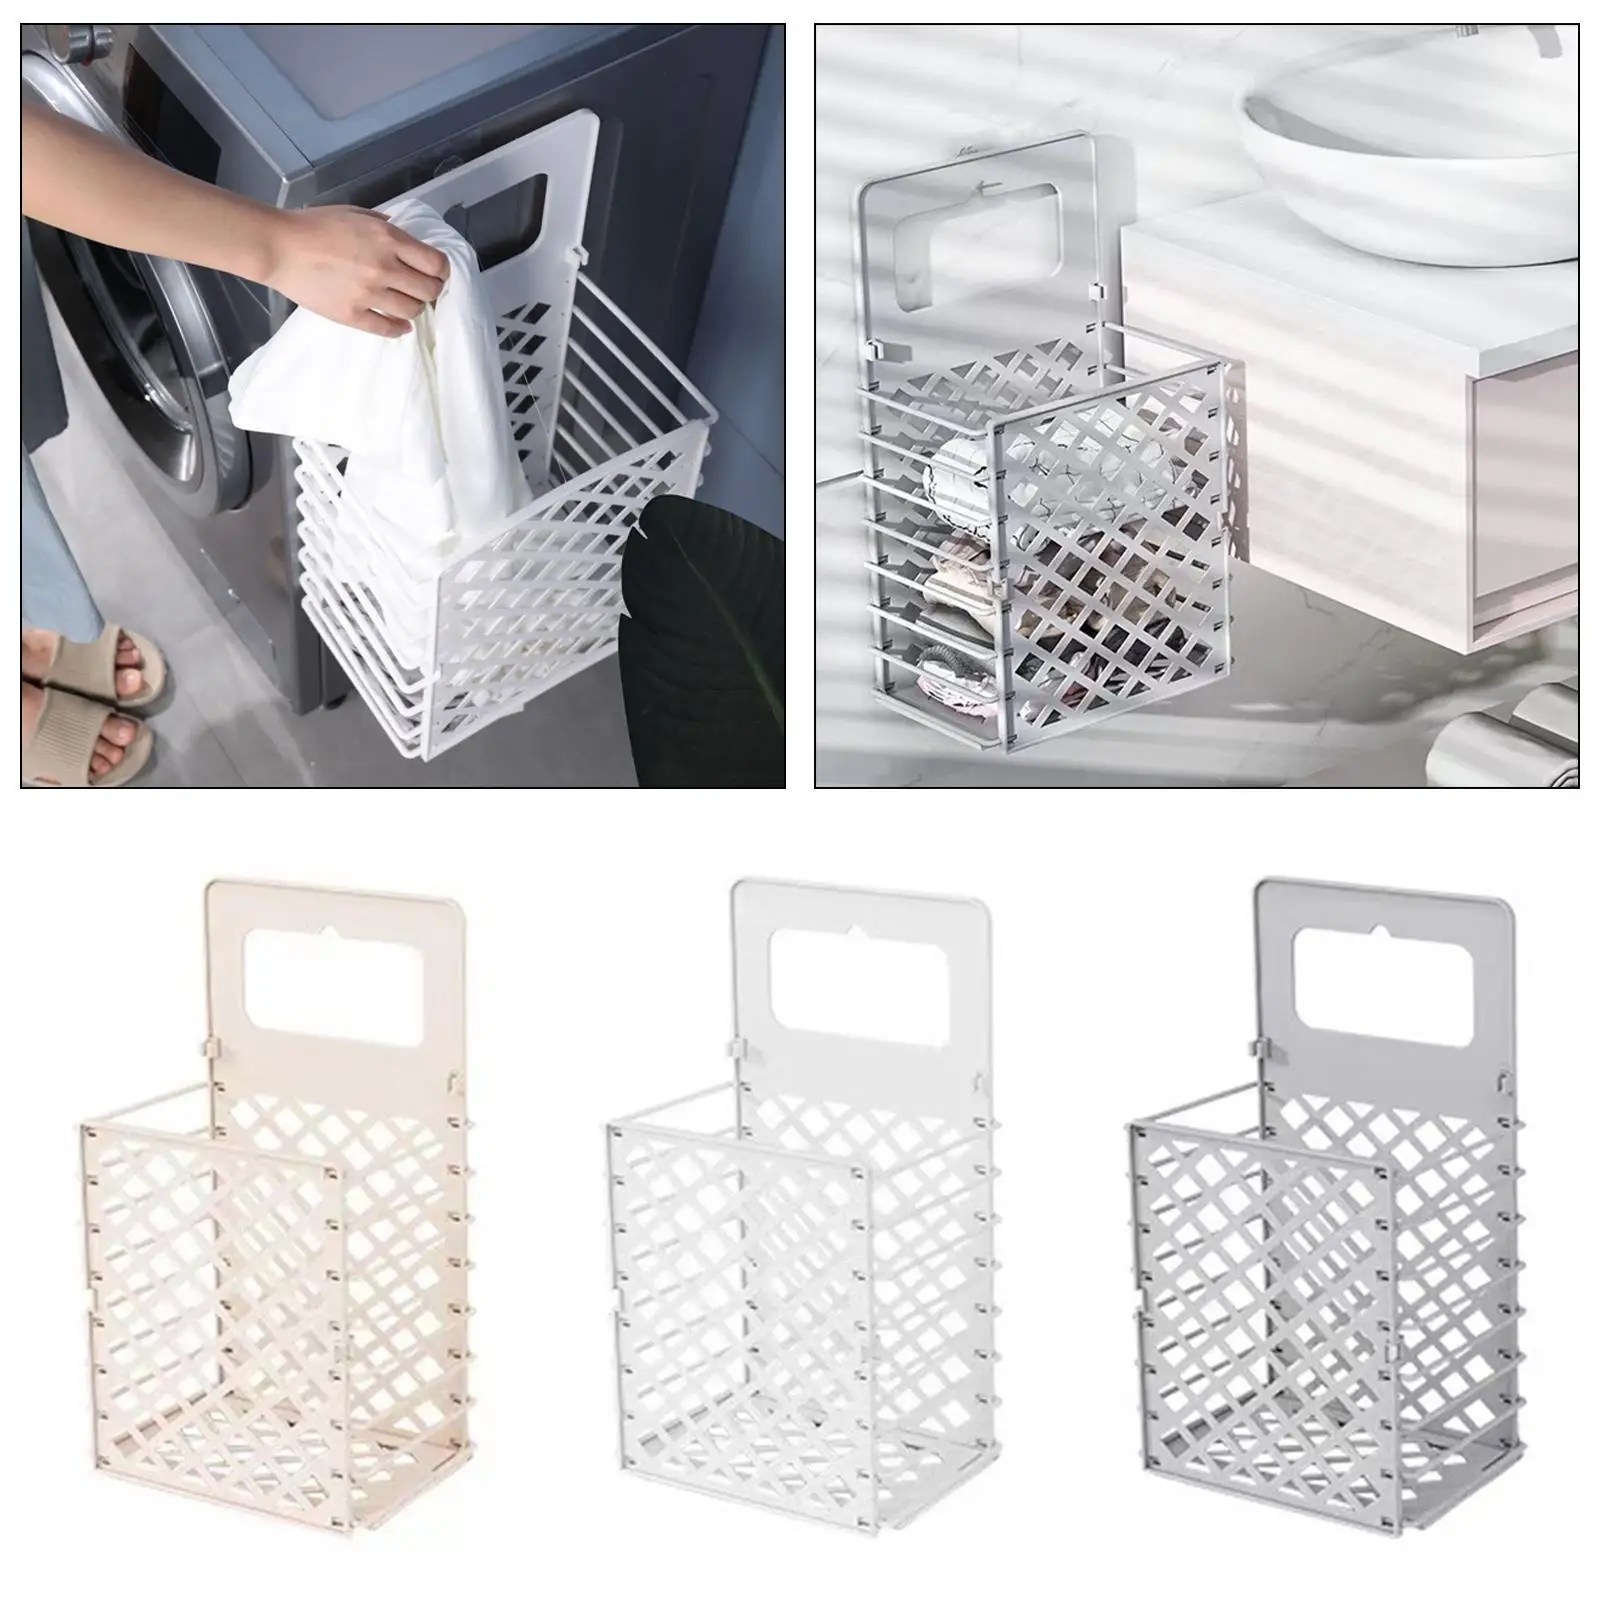 Collapsible Laundry Hamper Laundry Room Clothing Organizer Sundries Storage Bins Holder Laundry Basket for Bedroom Household